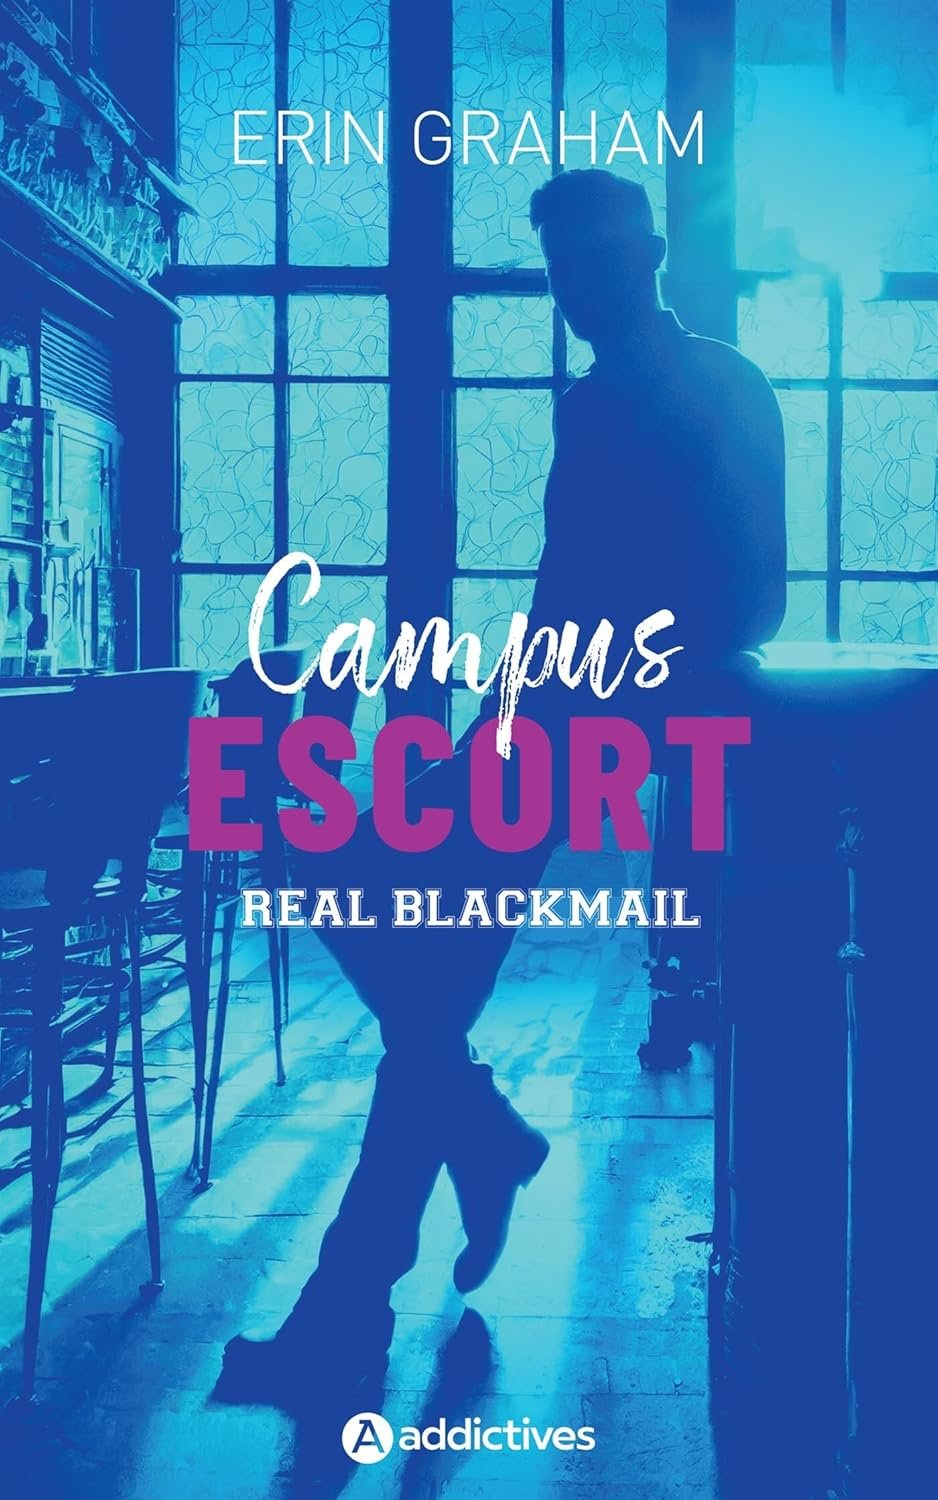 Erin Graham - Campus escort ,Tome 1 : Real blackmail